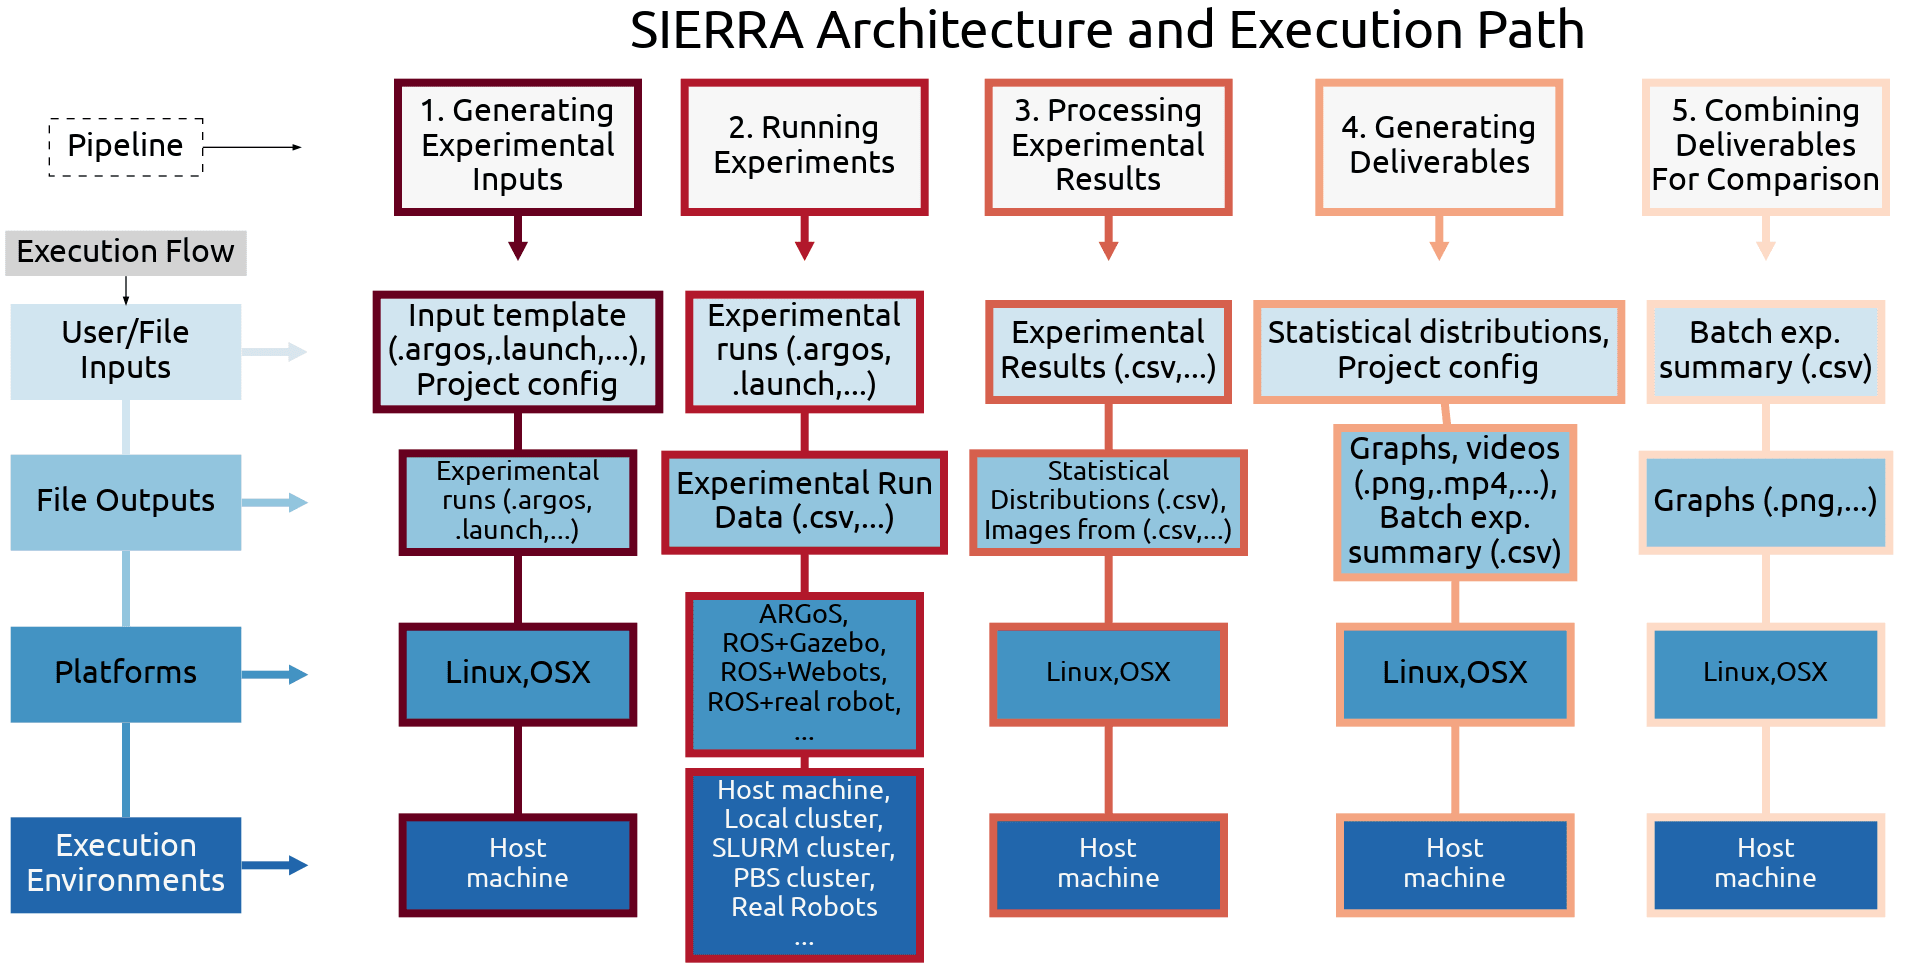 SIERRA architecture, organized by pipeline stage. Stages are listed
left to right, and an approximate joint architectural/functional stack
is top to bottom for each stage. “...” indicates areas where SIERRA is
designed via plugins to be easily extensible. “Host machine” indicates
the machine SIERRA was invoked
on.